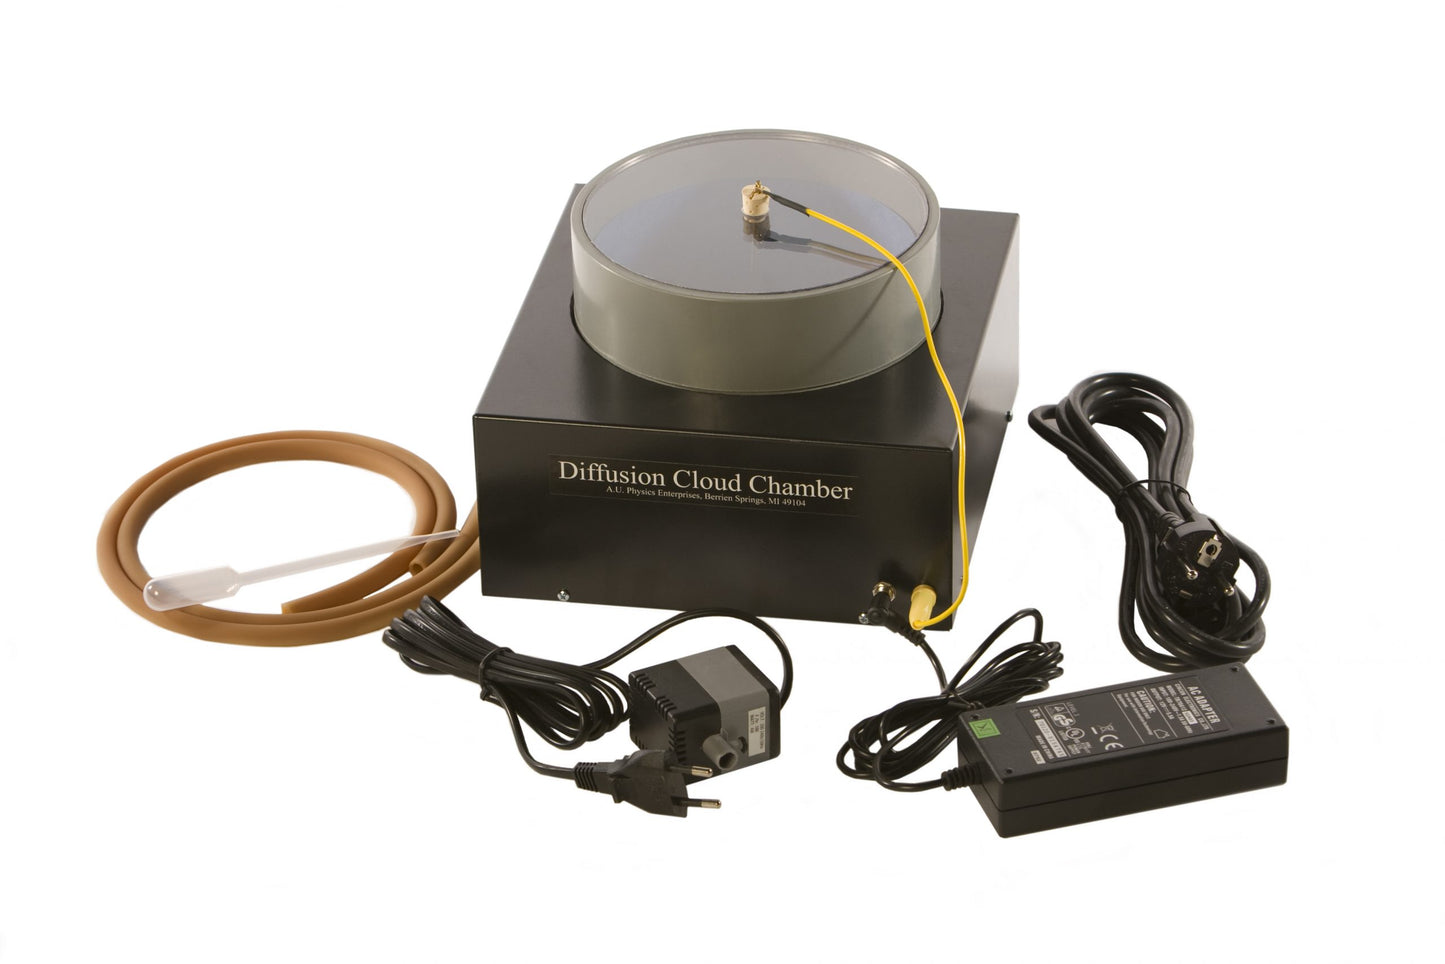 DCC-600 Diffusion Cloud Chamber